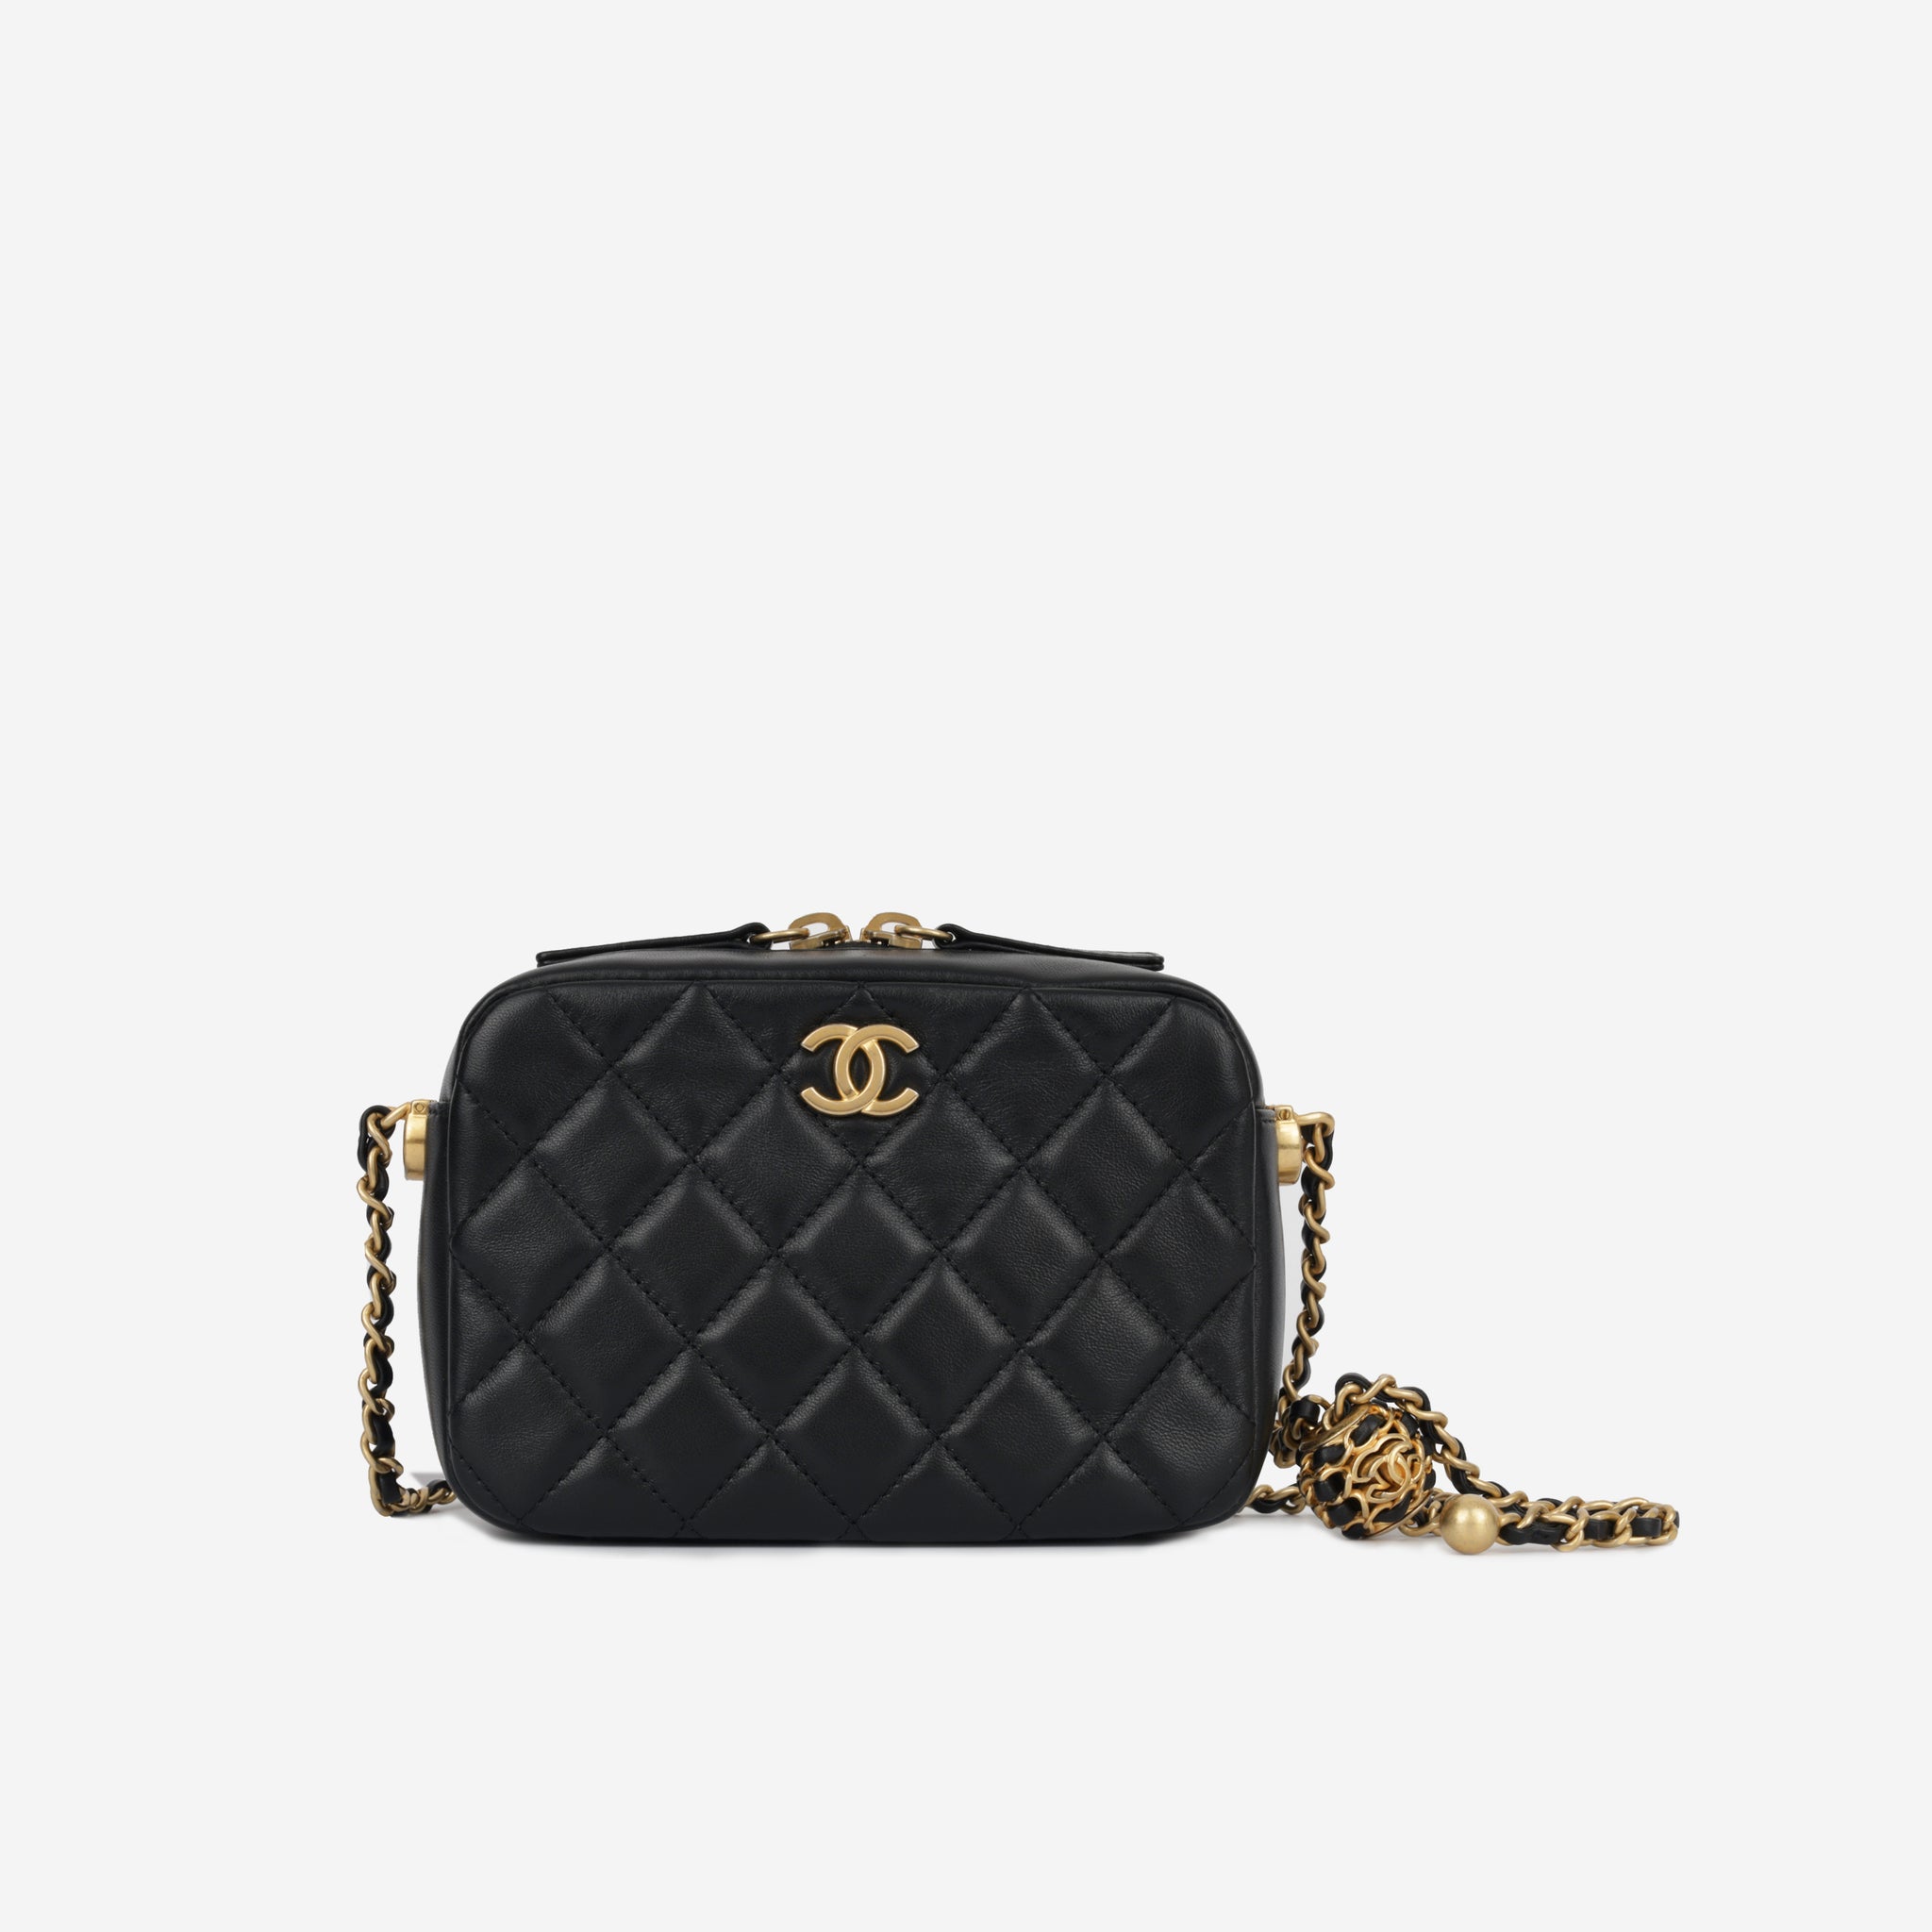 Chanel Black Quilted Lambskin Leather Mini Camera Bag